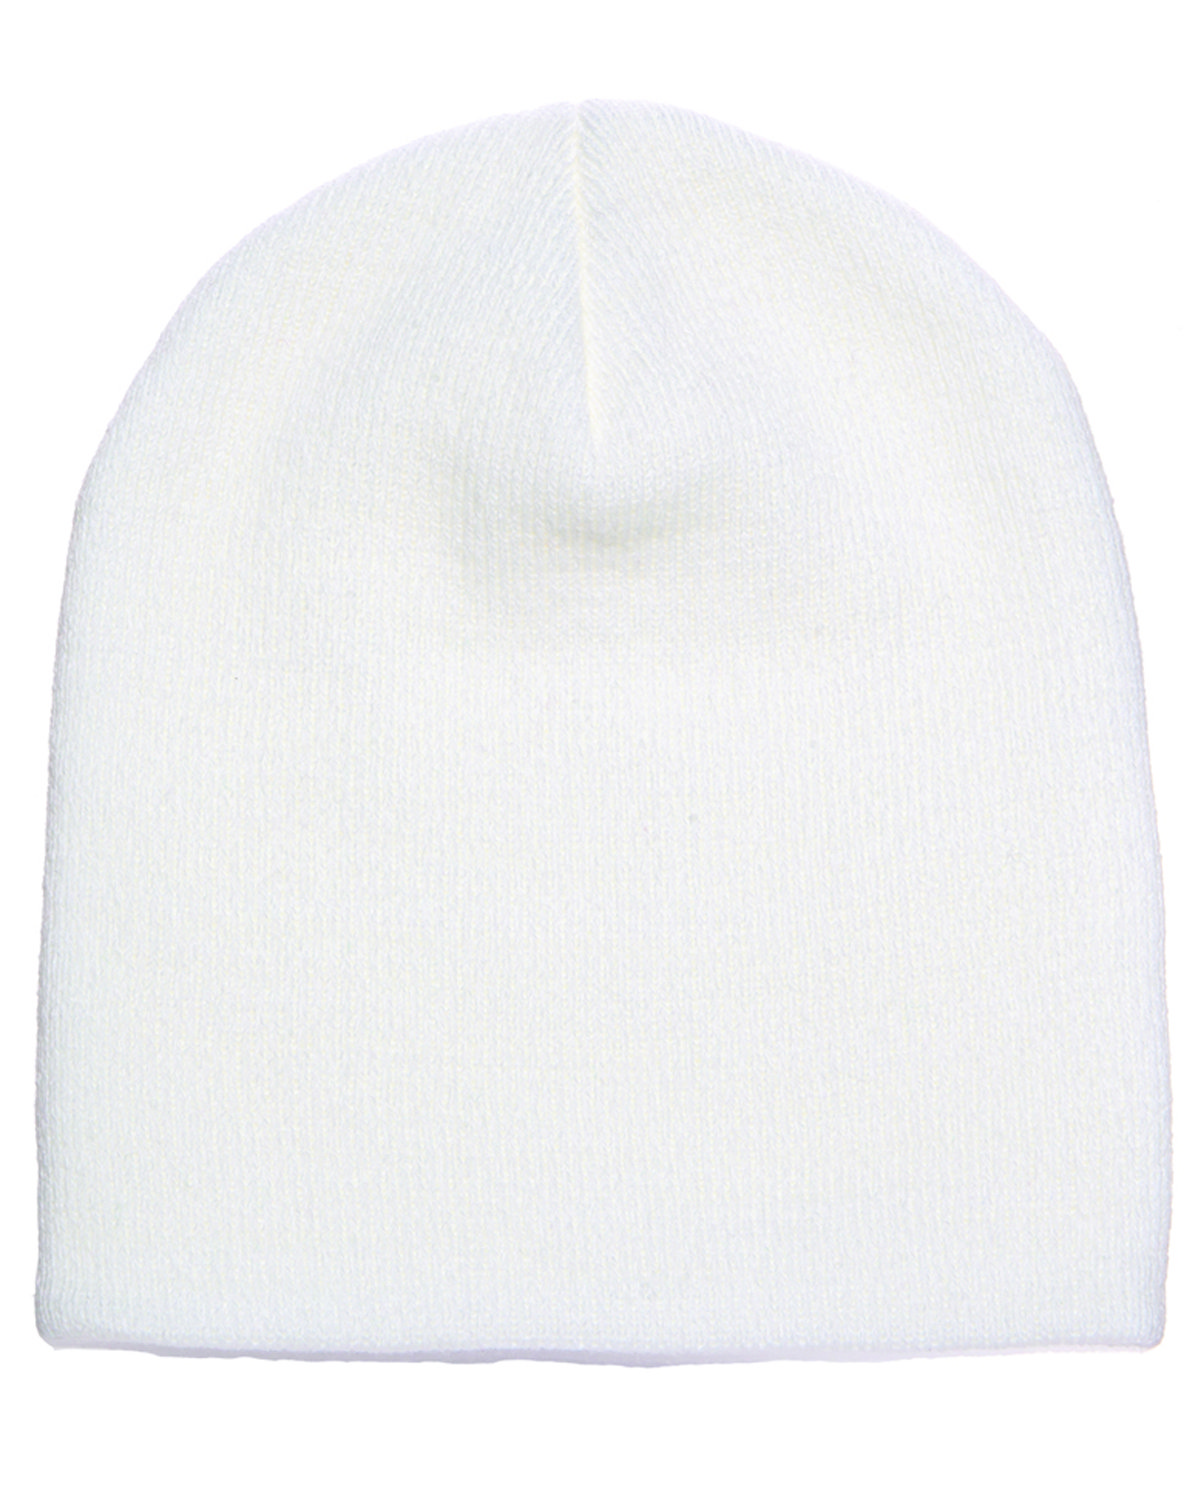 Adult Knit Beanie-Yupoong